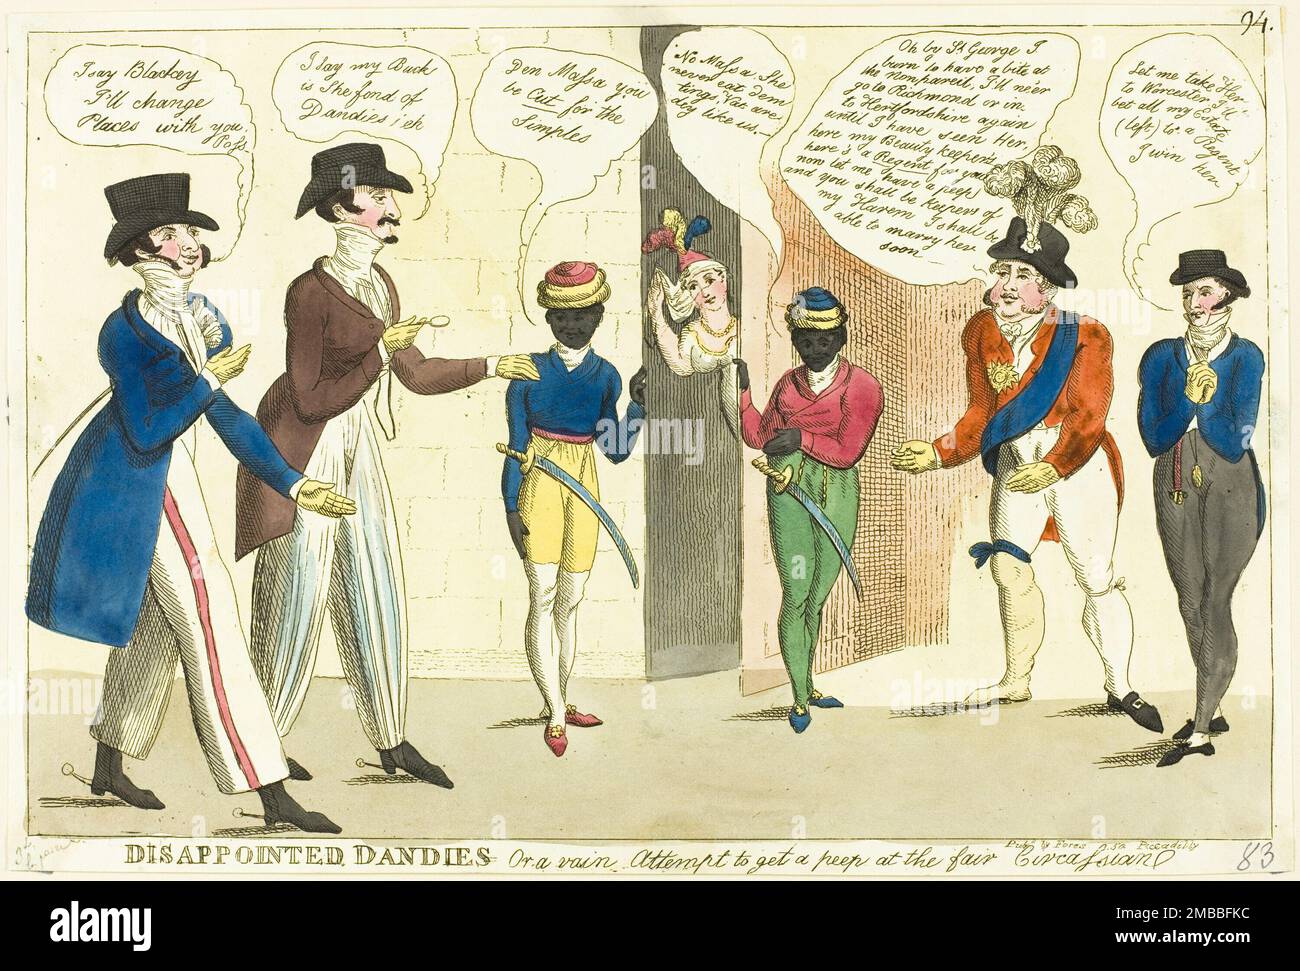 Disappointed Dandies - Or a vain Attempt to get a peep at the fair Circassian, published 1819. On the left, two noted dandies, Lord Yarmouth and Lord Petersham. 'I say Blackey I'll change places with you, Poss; I say my Buck is she fond of Dandies! eh; Den Massa you be Cut for the Simples; No Massa, She never eat den tings, Vat are dey like us.; [the Prince Regent]: Oh by St George I burn to have a bite at the nonpareil, I'll ne'er go to Richmond or in to Hertfordshire again until I have seen Her, here my Beauty keeper's here's a Regent for you now let me have a peep and you shall be keepers o Stock Photo